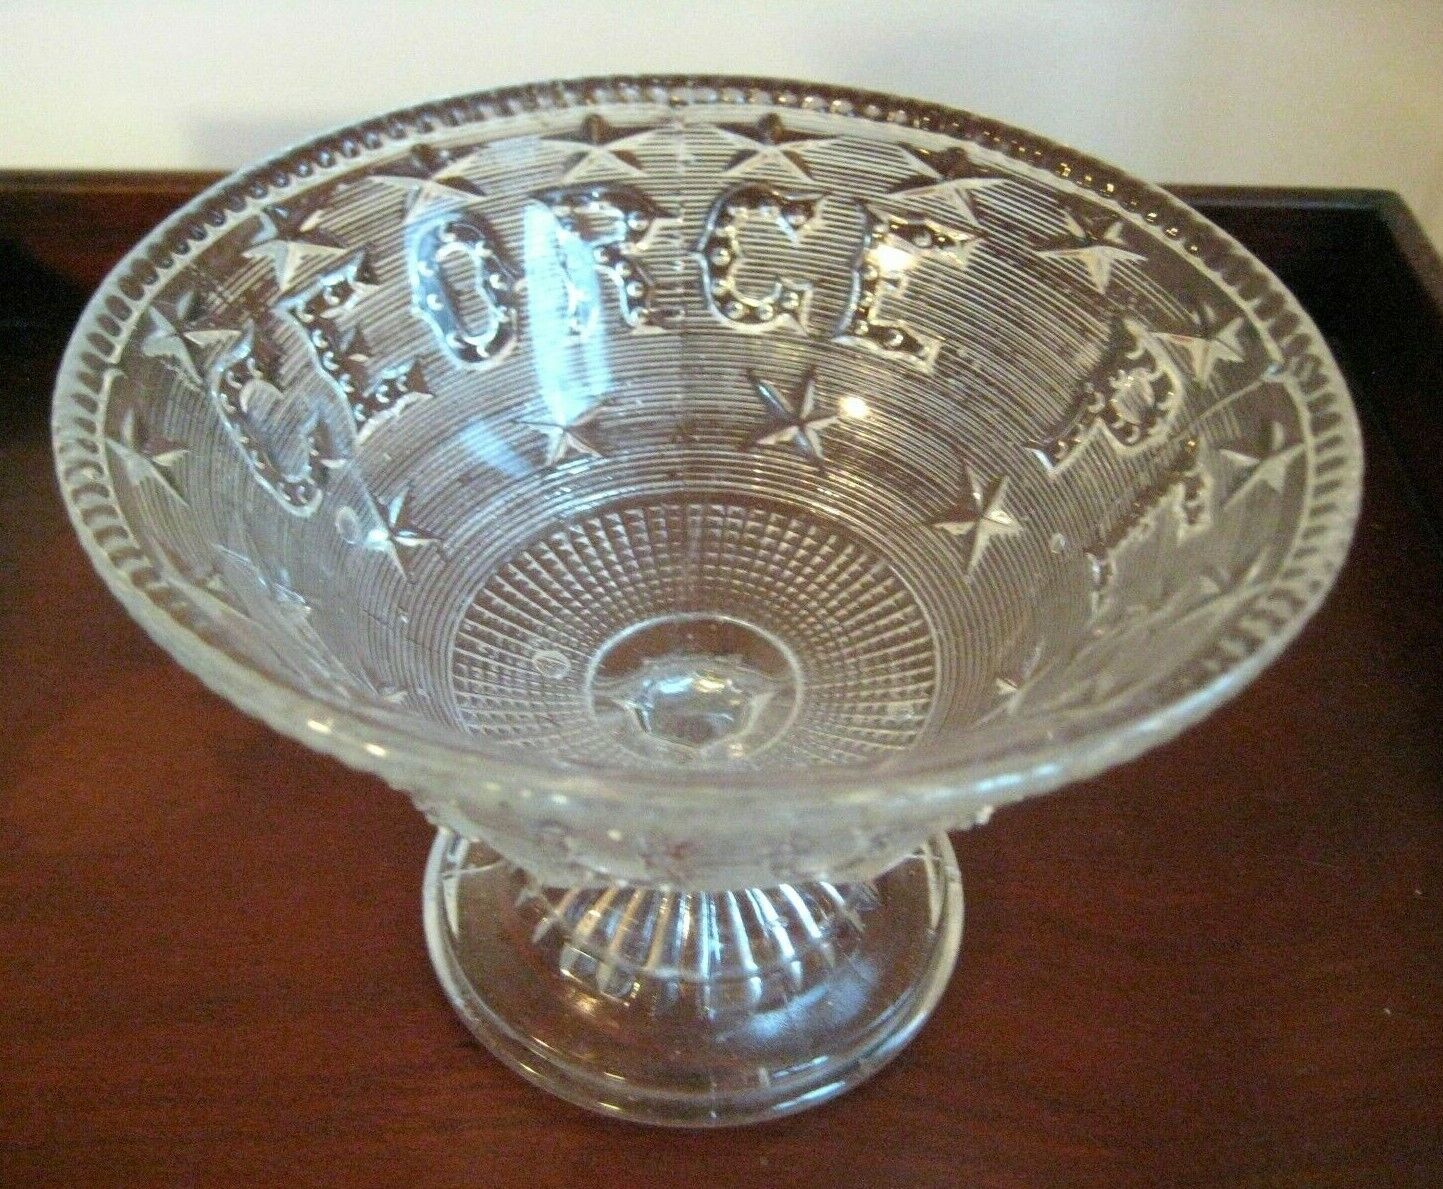  ANTIQUE VICTORIAN FLINT GLASS COMPOTE C1869 GEORGE PEABODY 